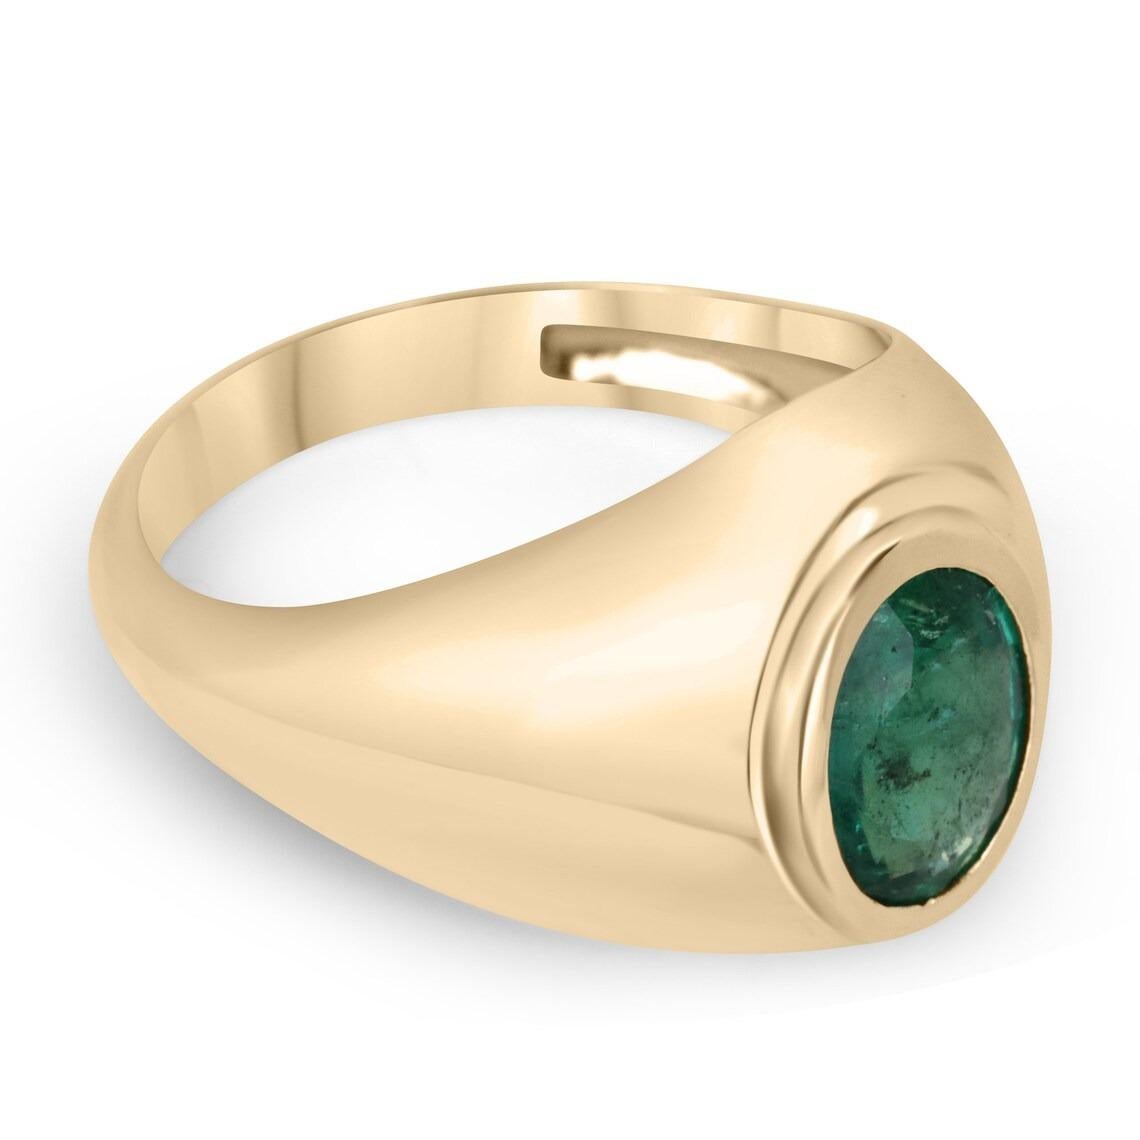 A luxurious solitaire emerald ring. The center stone features a magnificent 2.60-carat, natural oval-cut emerald ethically sourced from the origins of Zambia. This gemstone showcases an enthralling medium-dark green color with very good luster and